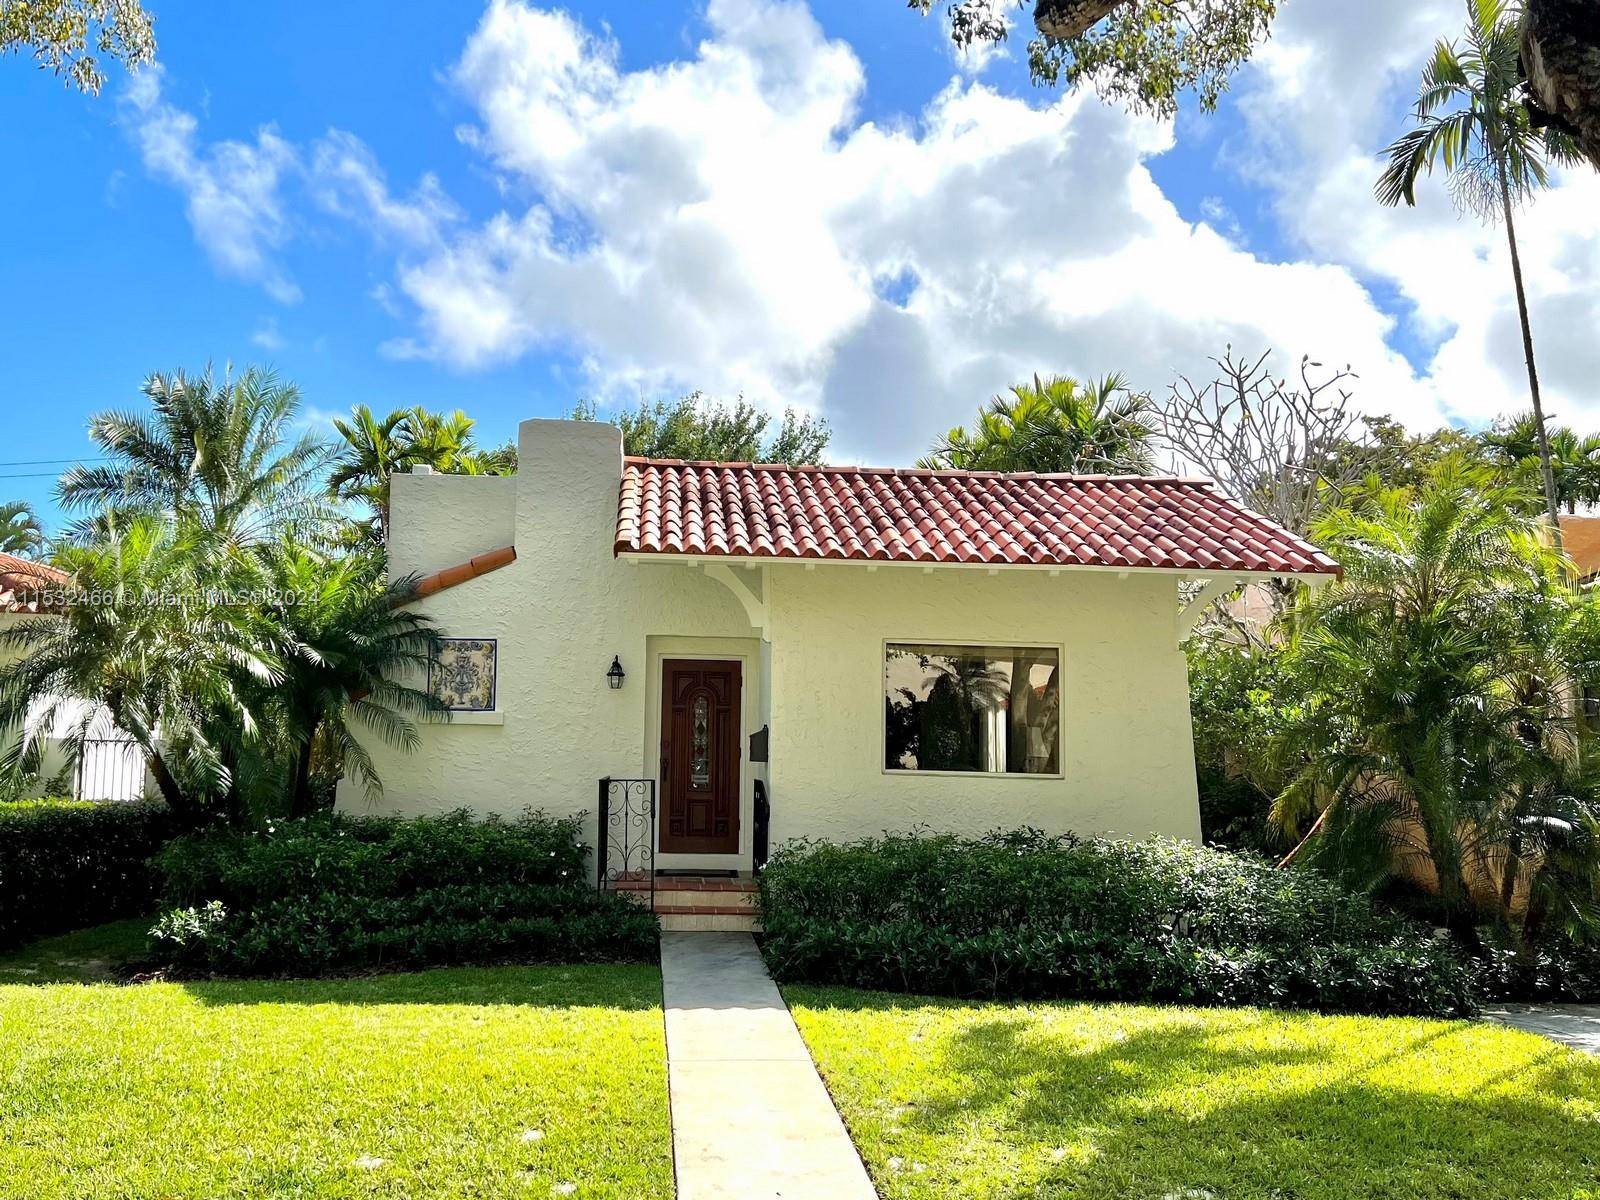 Prime location, steps from Granada Golf course, Biltmore Hotel, Salvadore Tennis Park, Coral Gables Country Club.